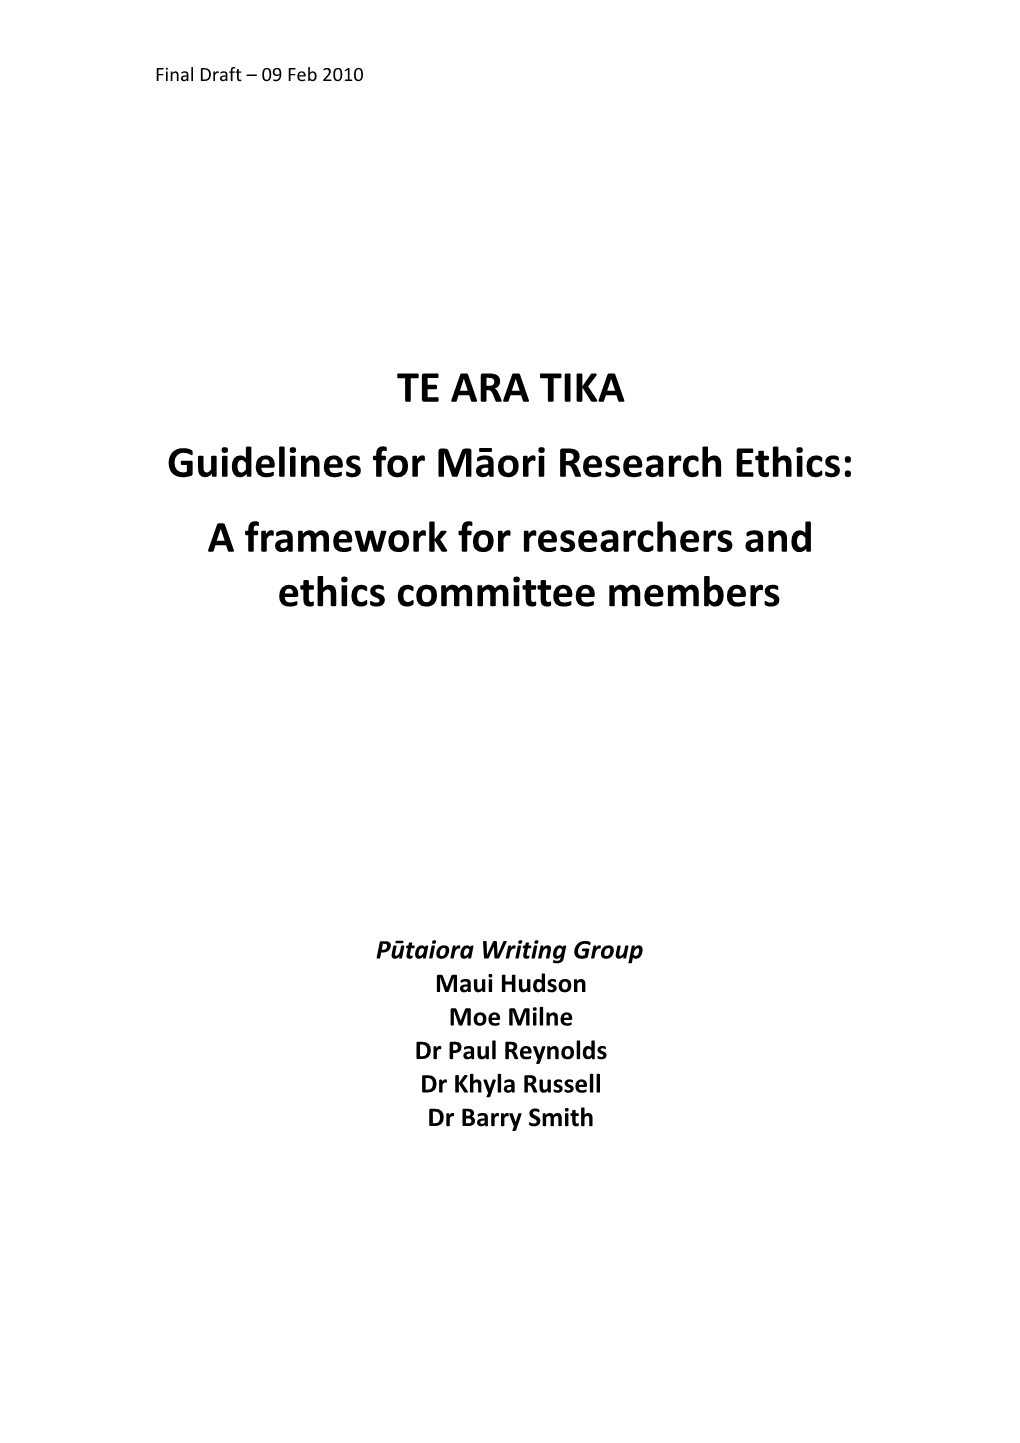 A Framework for Researchers and Ethics Committee Members